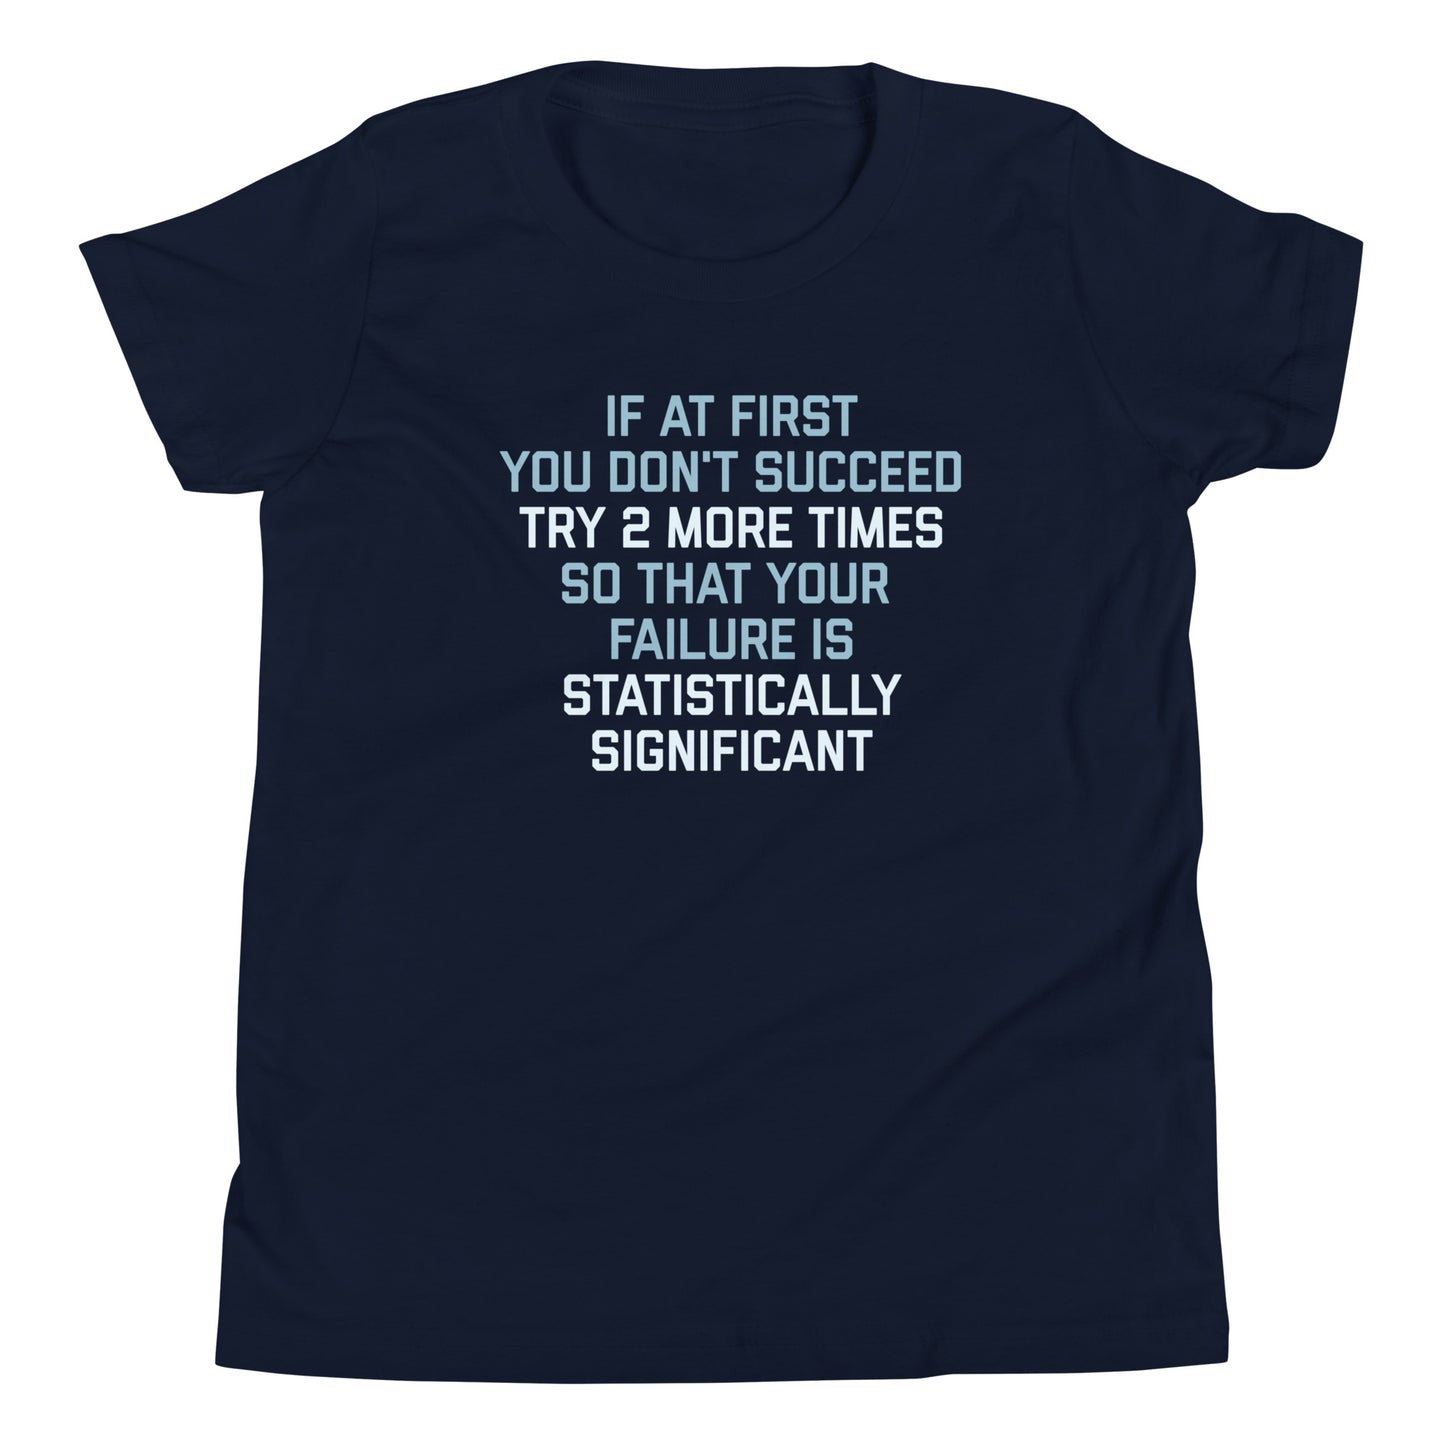 Try 2 More Times So That Your Failure Is Statistically Significant Kid's Youth Tee